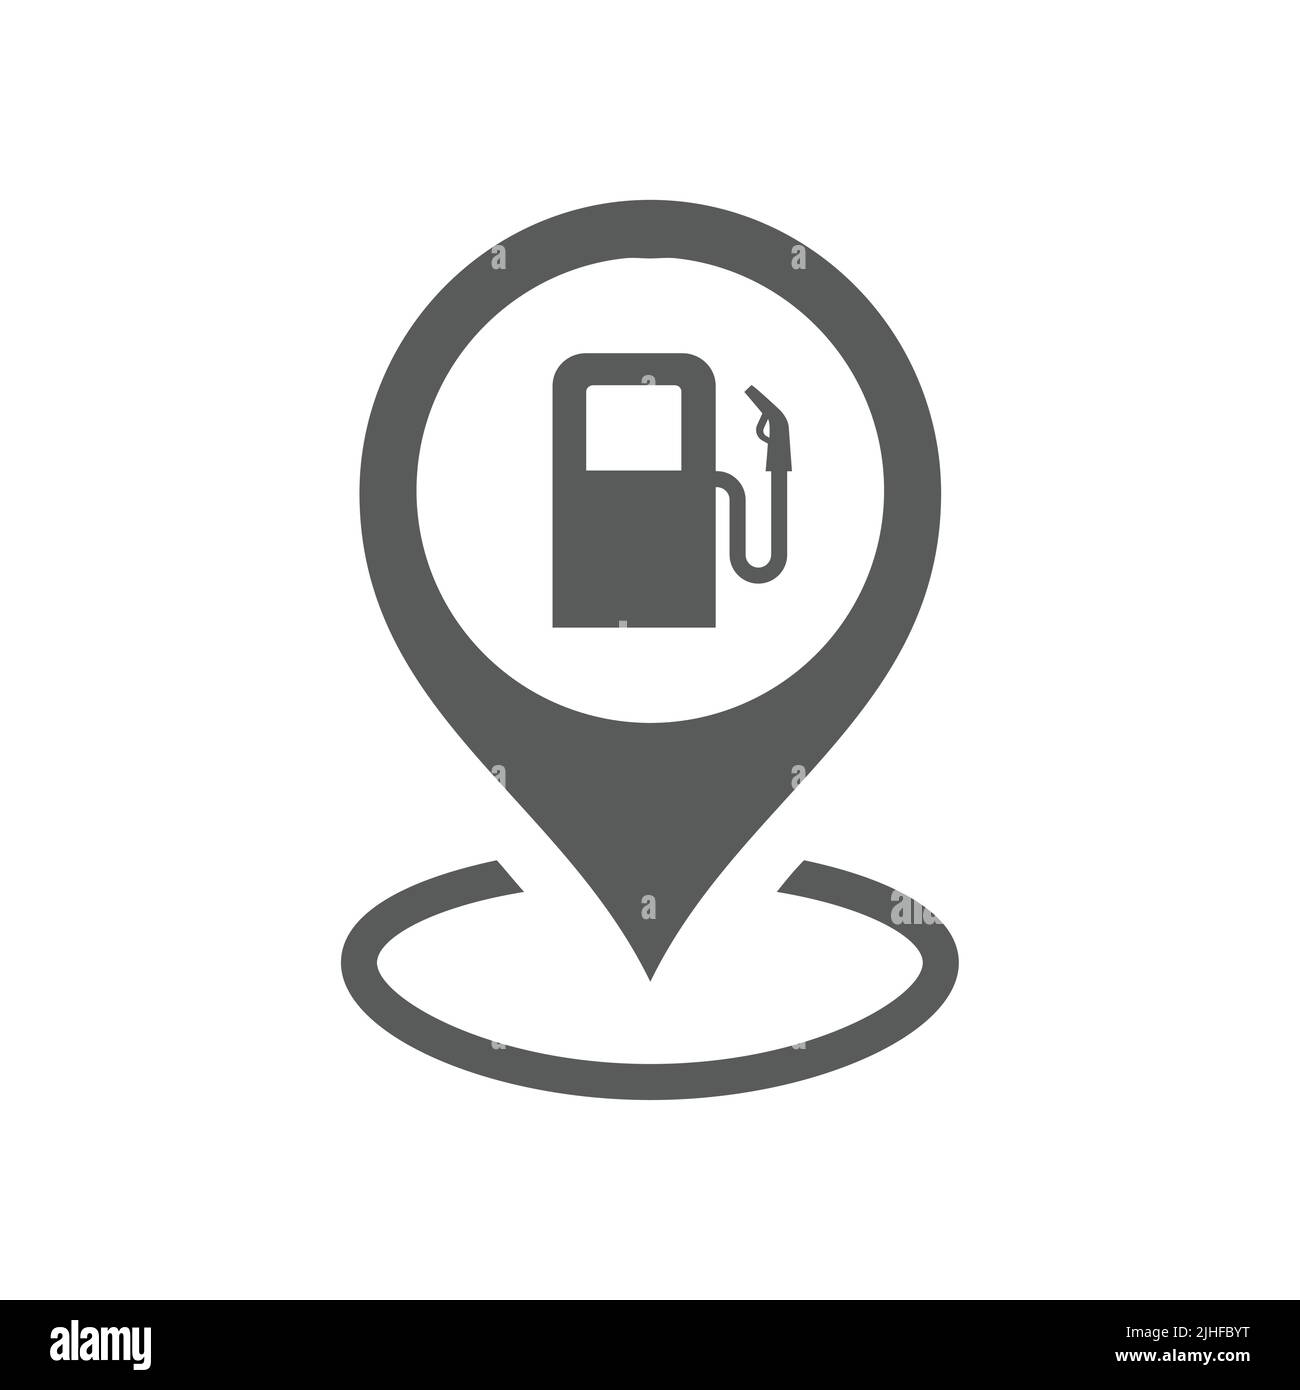 Location pin for gas station vector icon. Simple black filled symbol. Stock Vector